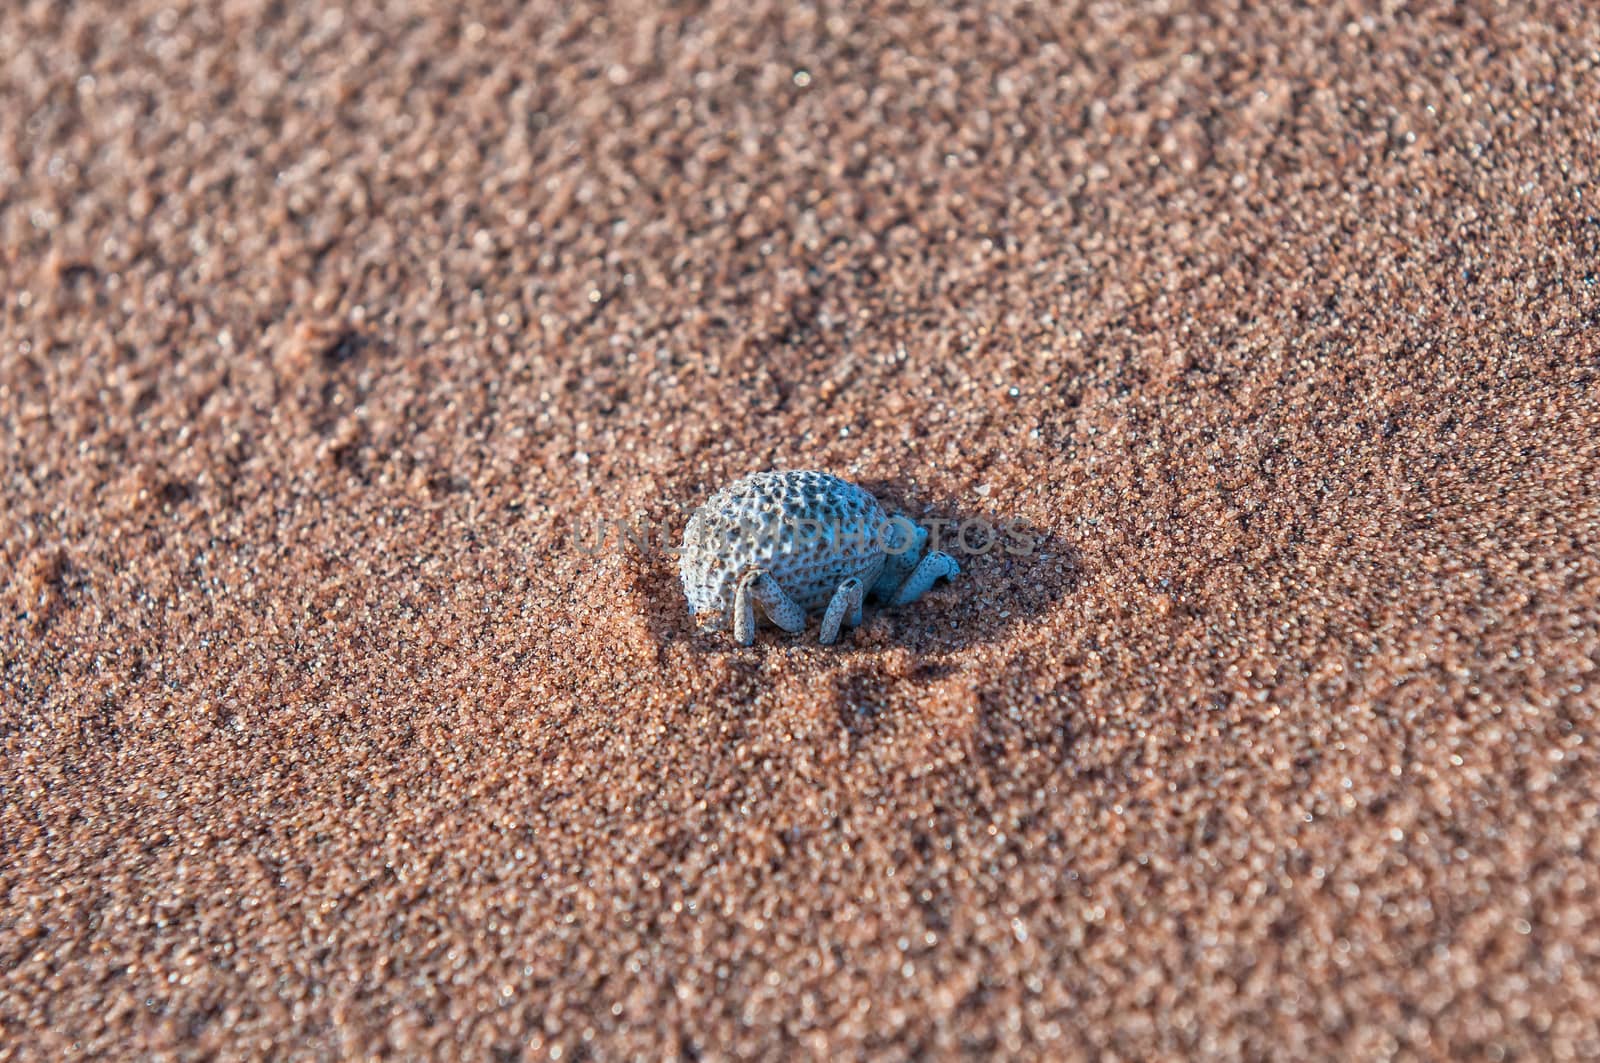 Insect in the sand of a dune at Sossusvlei by dpreezg